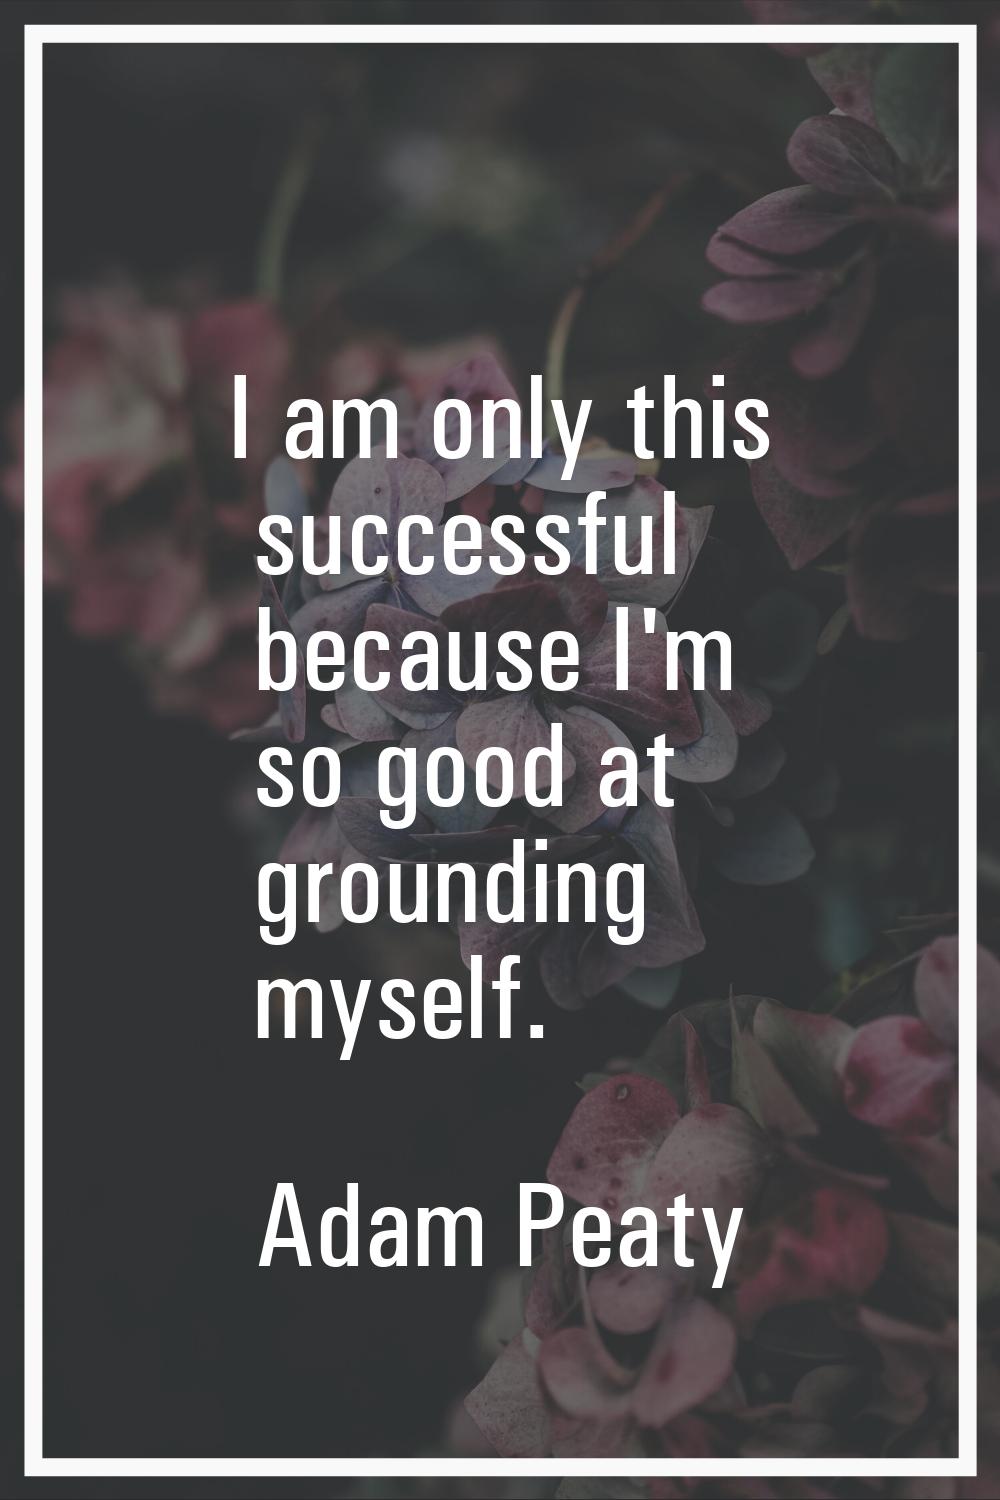 I am only this successful because I'm so good at grounding myself.